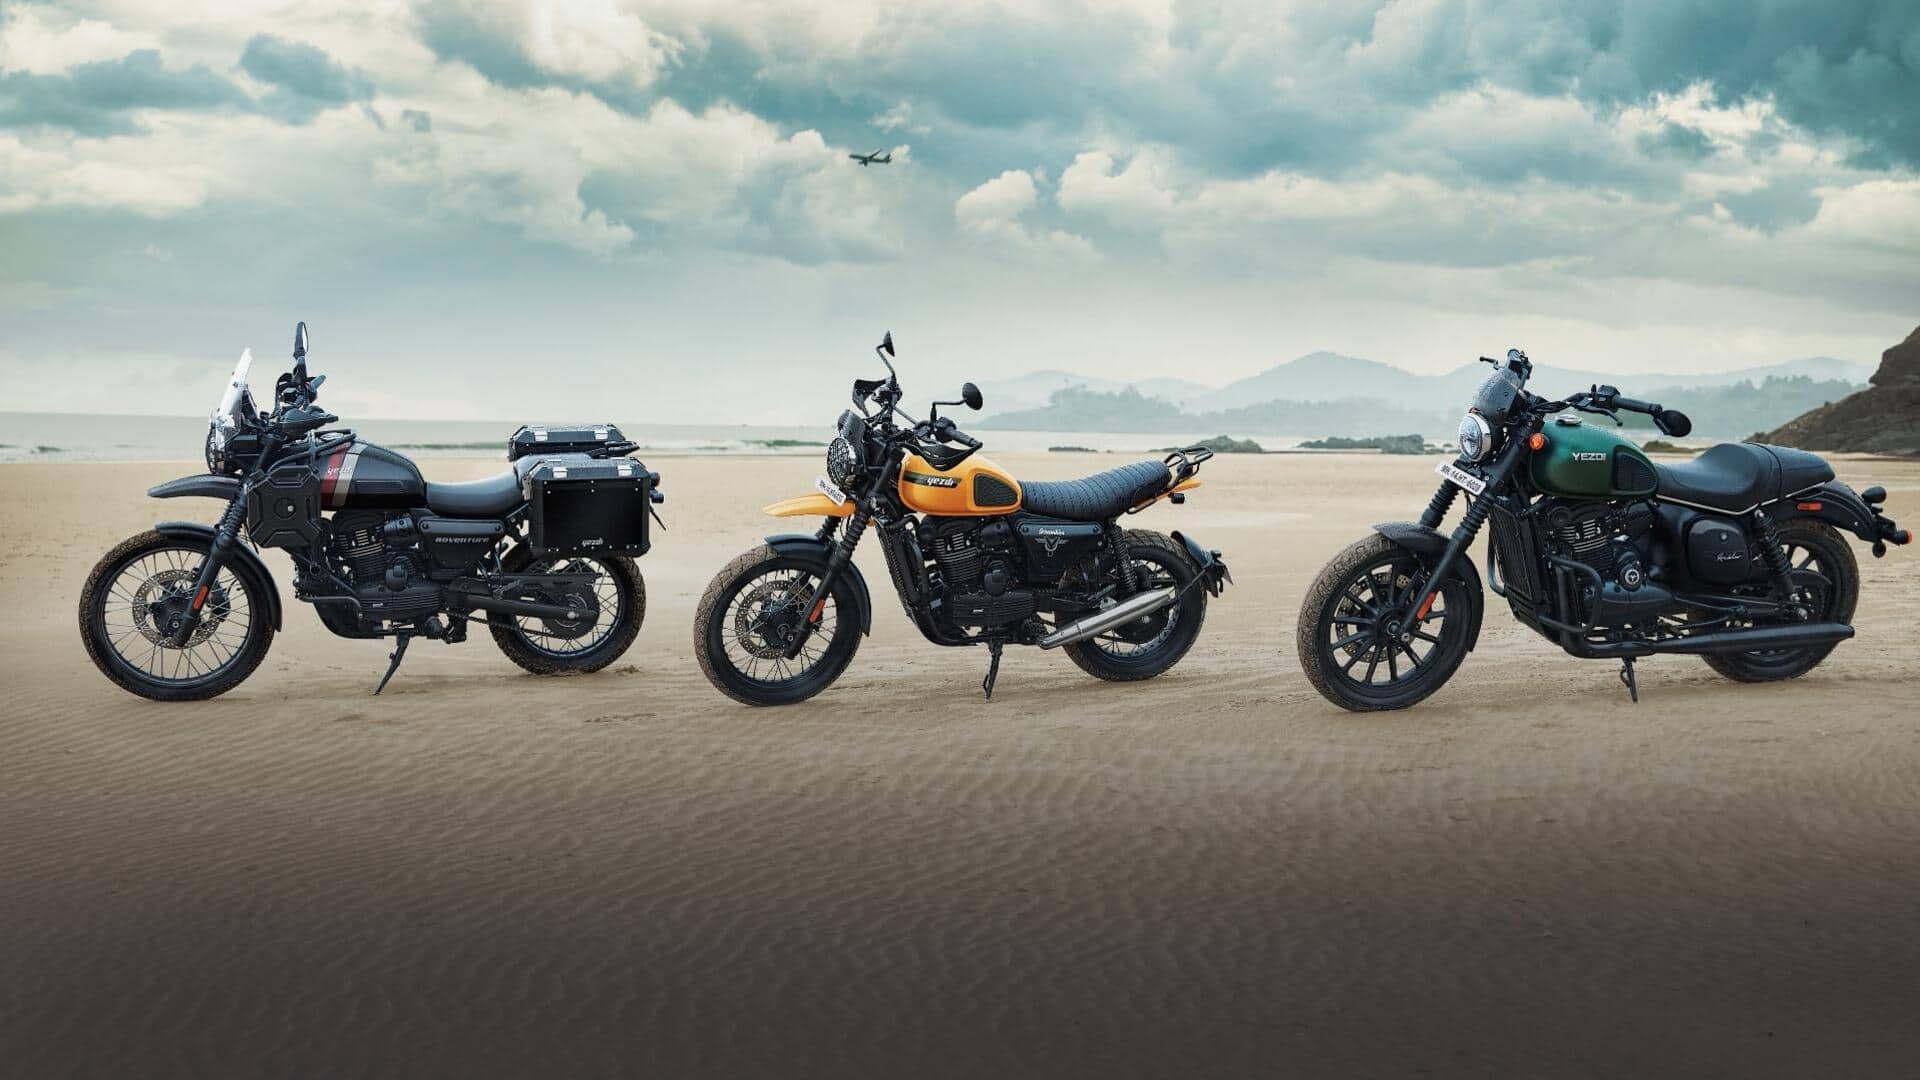 JAWA, Yezdi motorcycles available with free extended warranty this Diwali